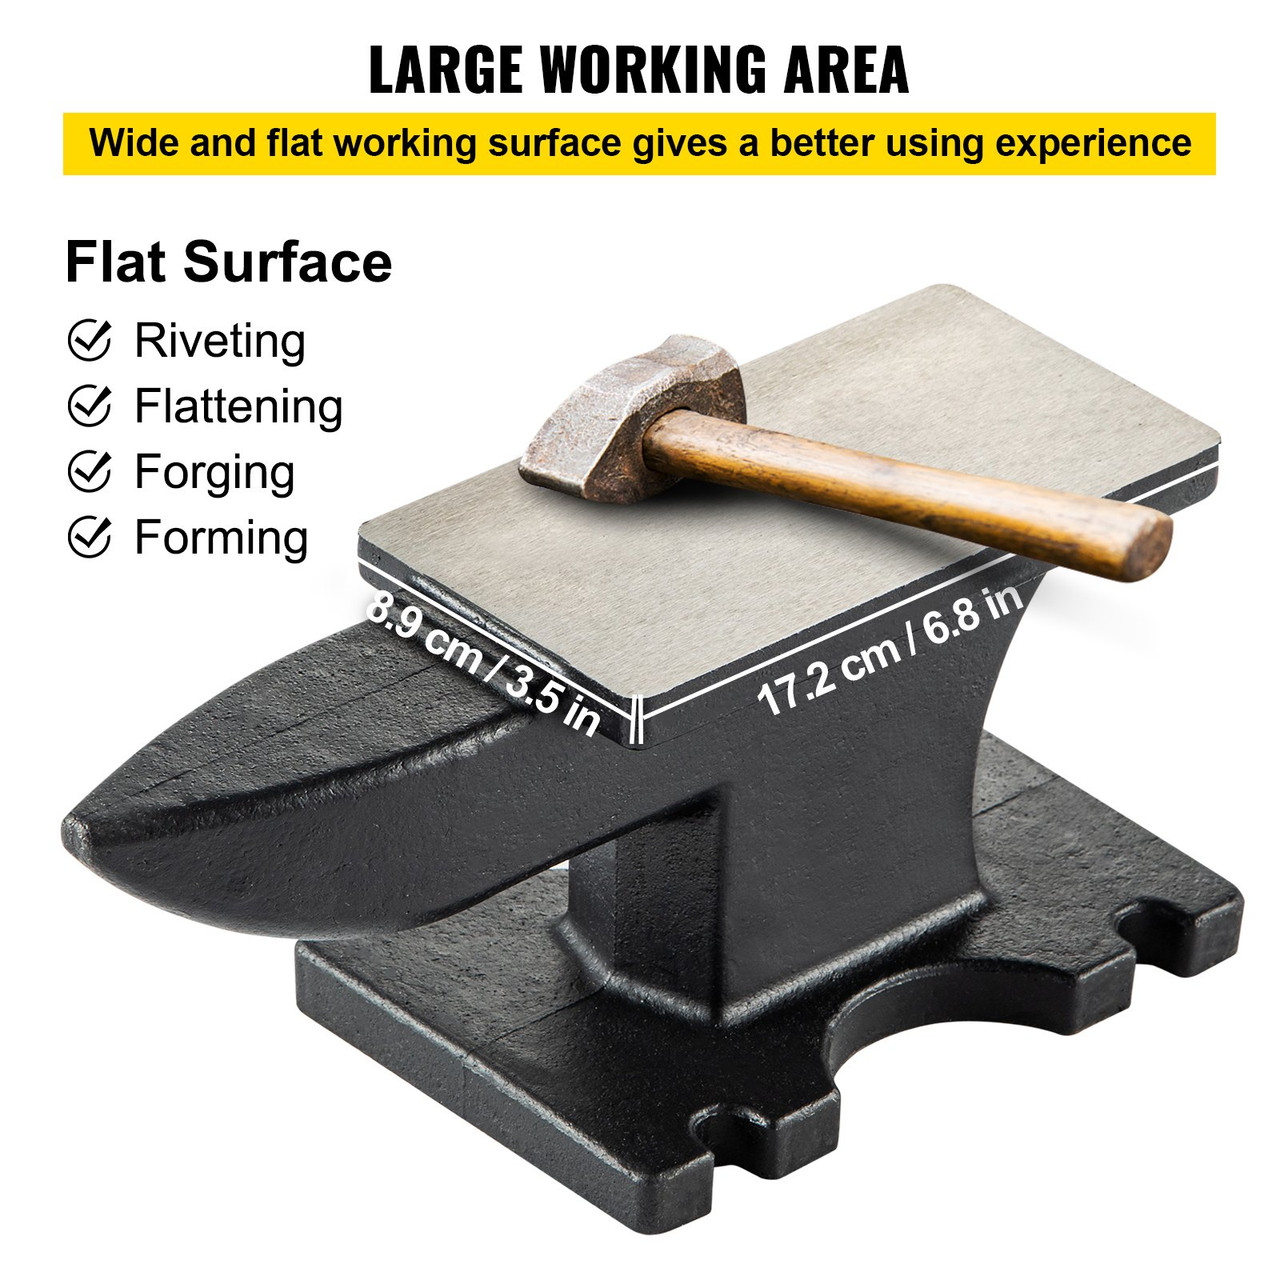 Cast Iron Anvil, 25 Lbs(11kg) Single Horn Anvil with 6.8 x 3.5 inch Countertop and Stable Base, High Hardness Rugged Round Horn Anvil Blacksmith, for Bending, Shaping